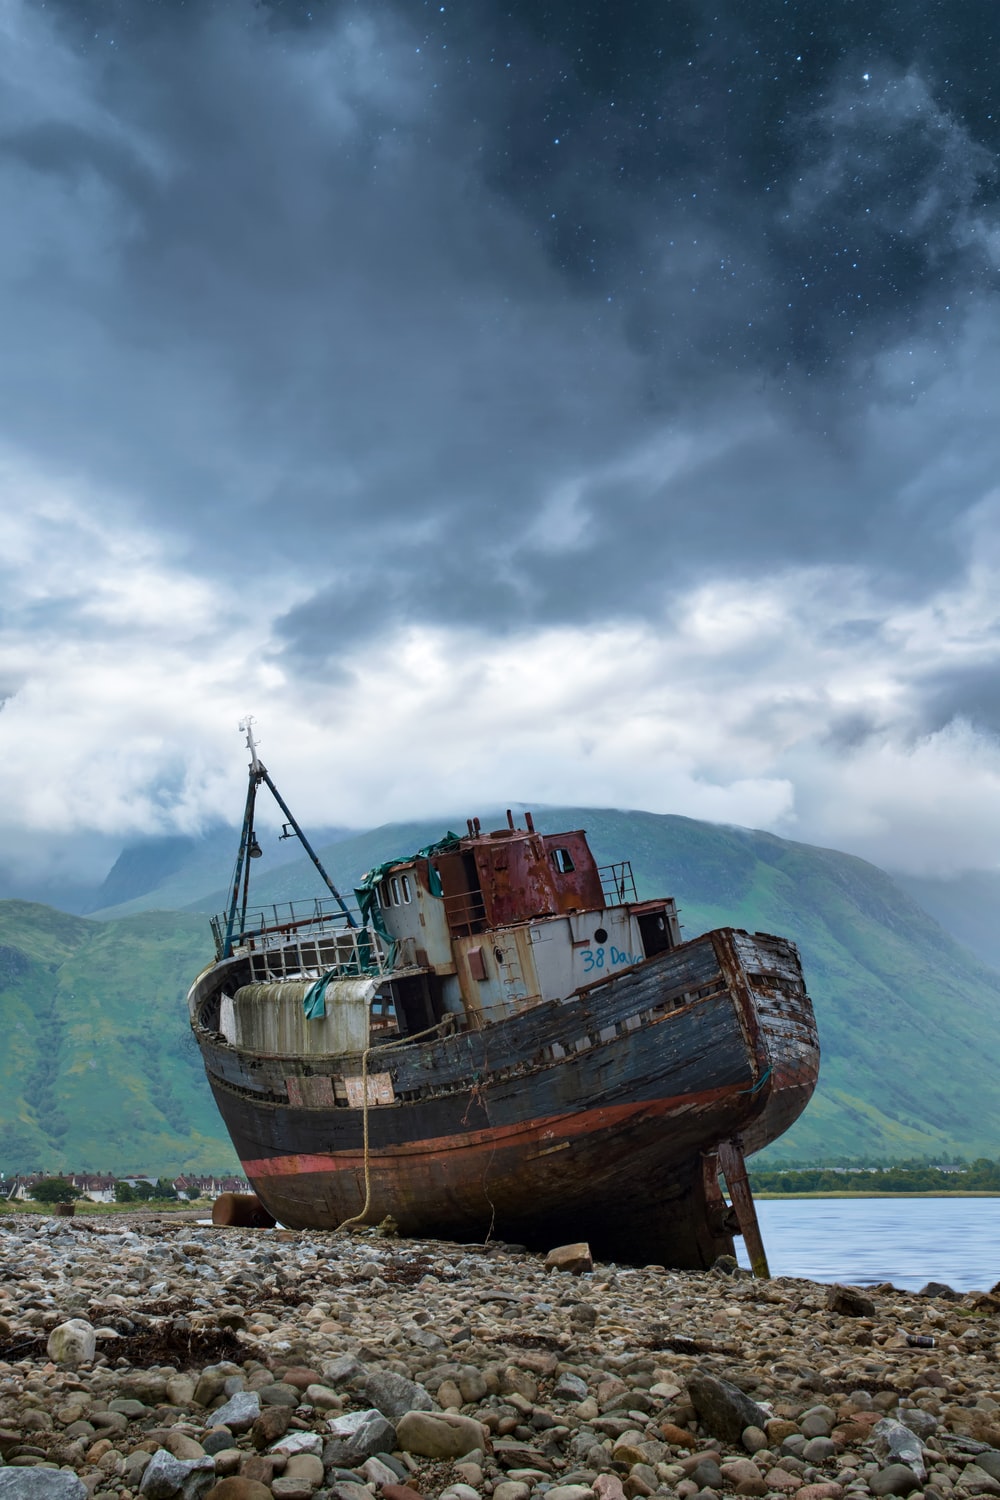 Ghost Ship Picture. Download Free Image